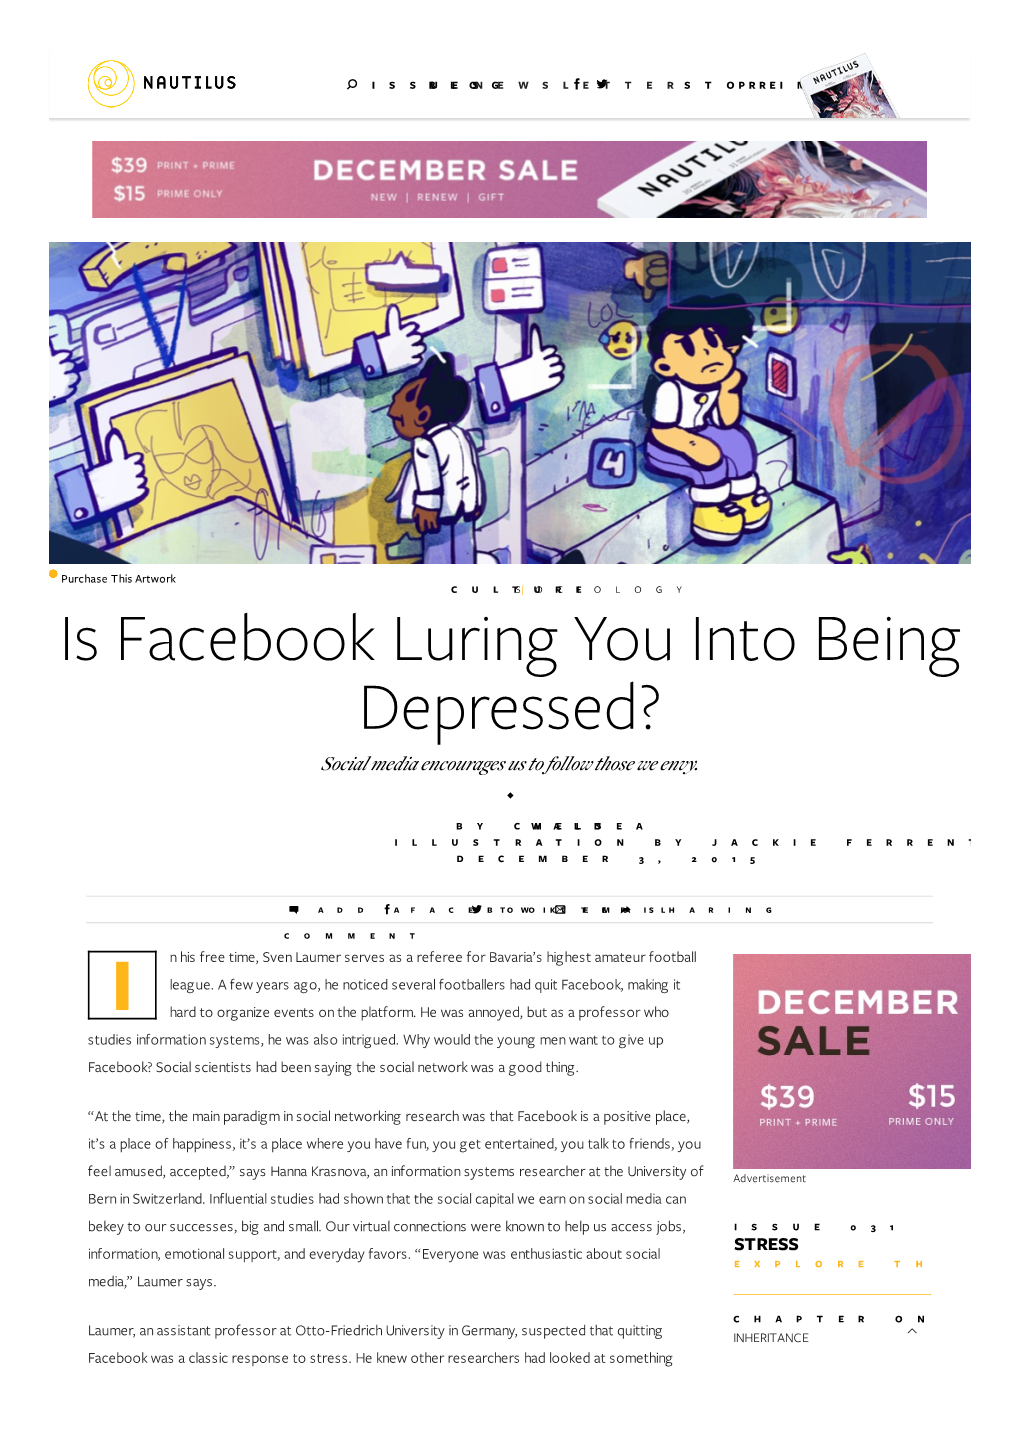 Do Facebook and Twitter Make You Depressed?